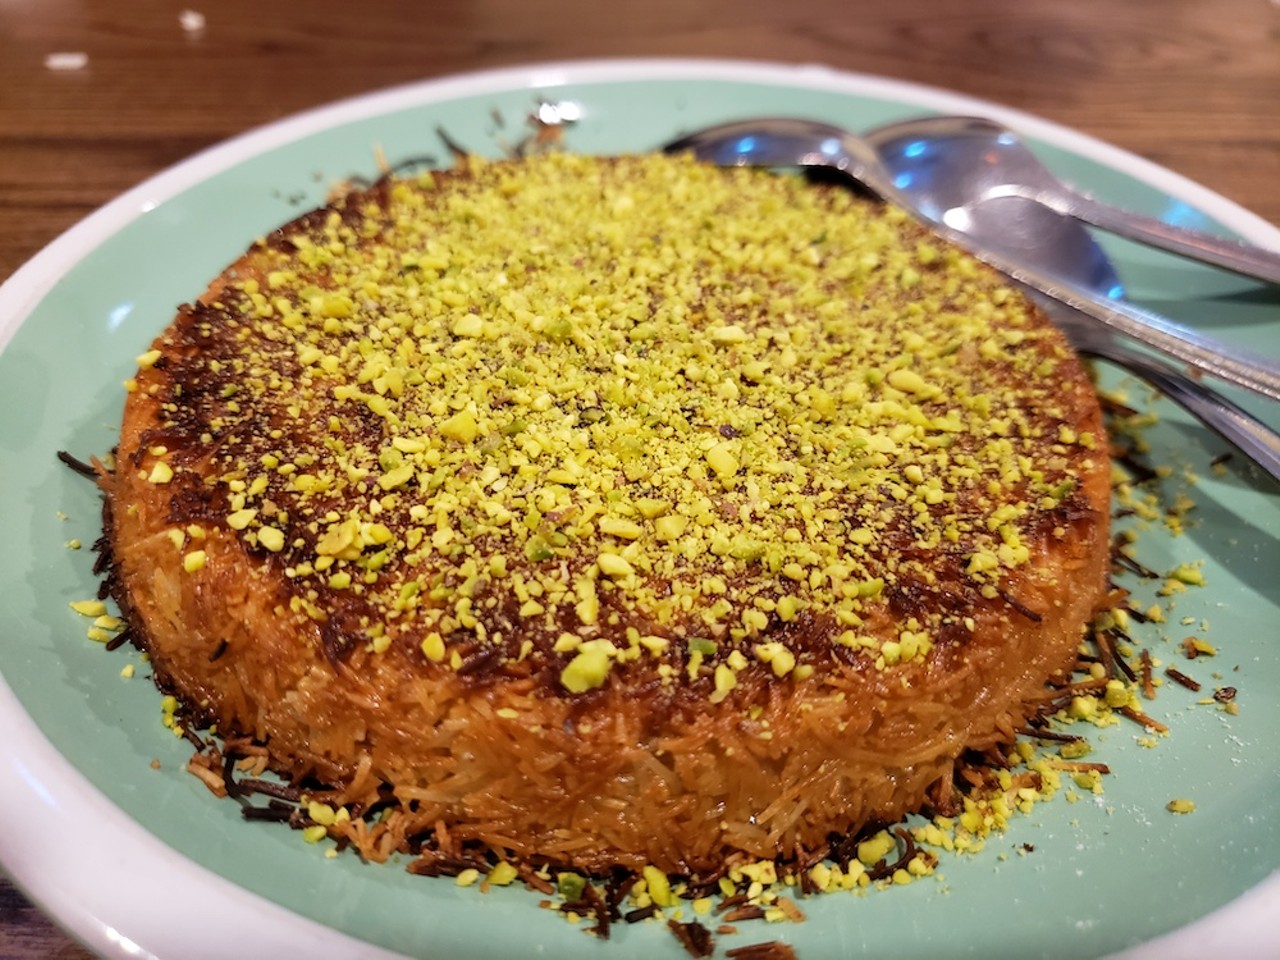 
Kunefe, Istanbul Grill
The cheese-filled, phyllo-threaded, pistachio-topped pastry is an absolute favorite of mine, and the version served here is unexpectedly devoid of the syrup that typically pools around the base, making for a significantly lighter, and less cloying, capper to a meal.
